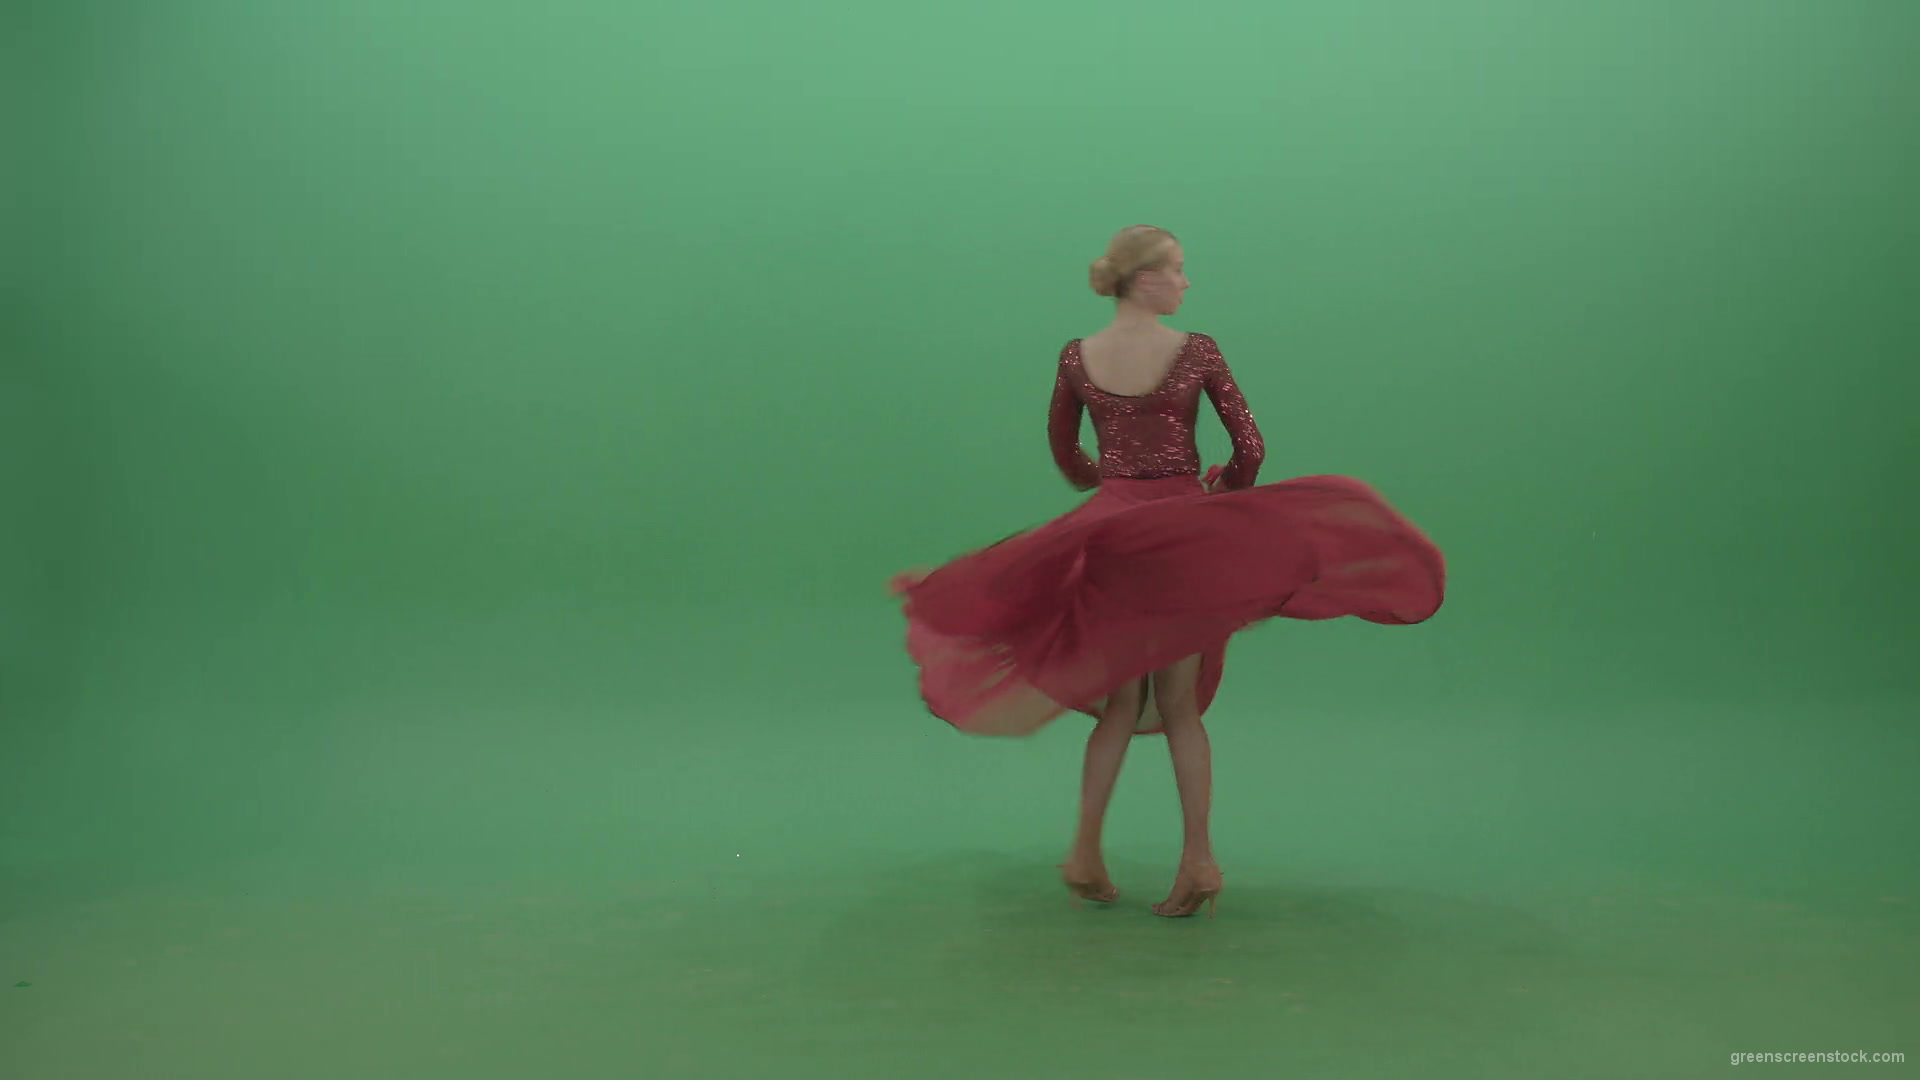 vj video background Spinning-woman-in-red-dress-showing-dance-flamenco-moves-over-green-screen-4K-Video-Footage-1920_003